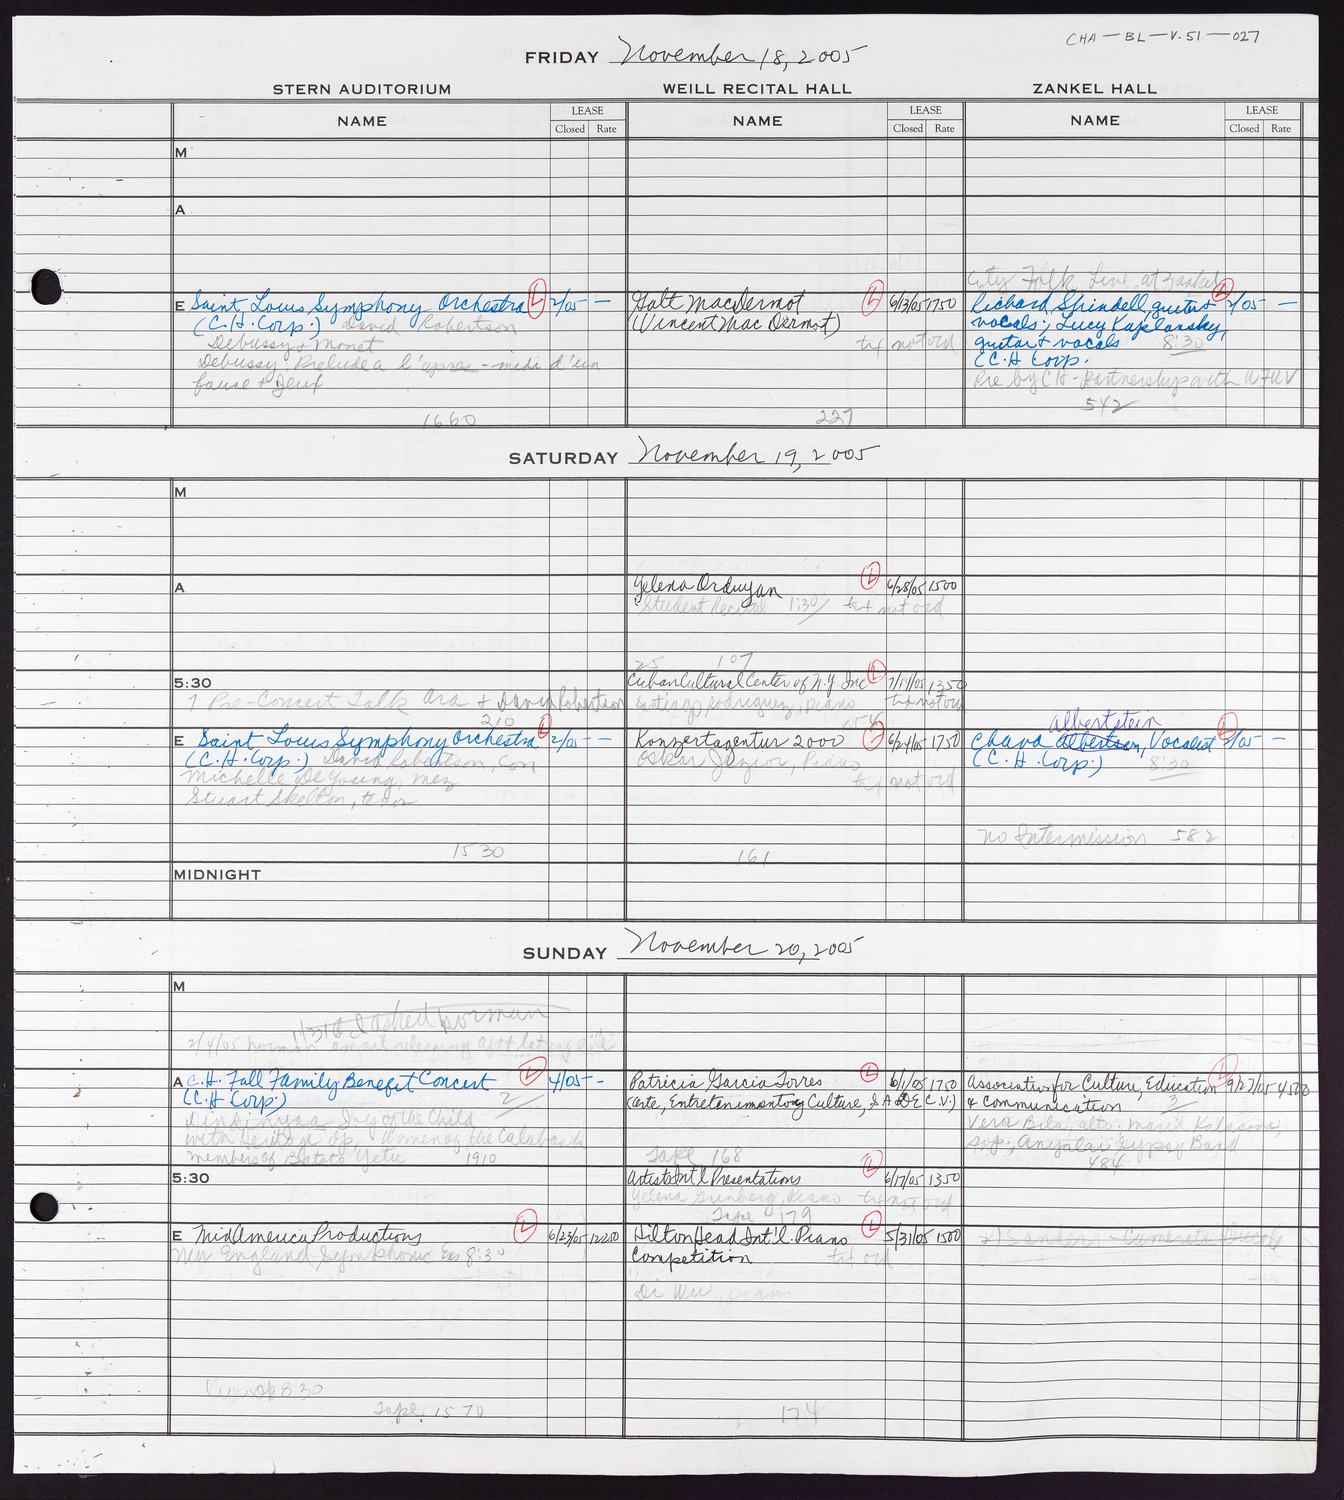 Carnegie Hall Booking Ledger, volume 51, page 27